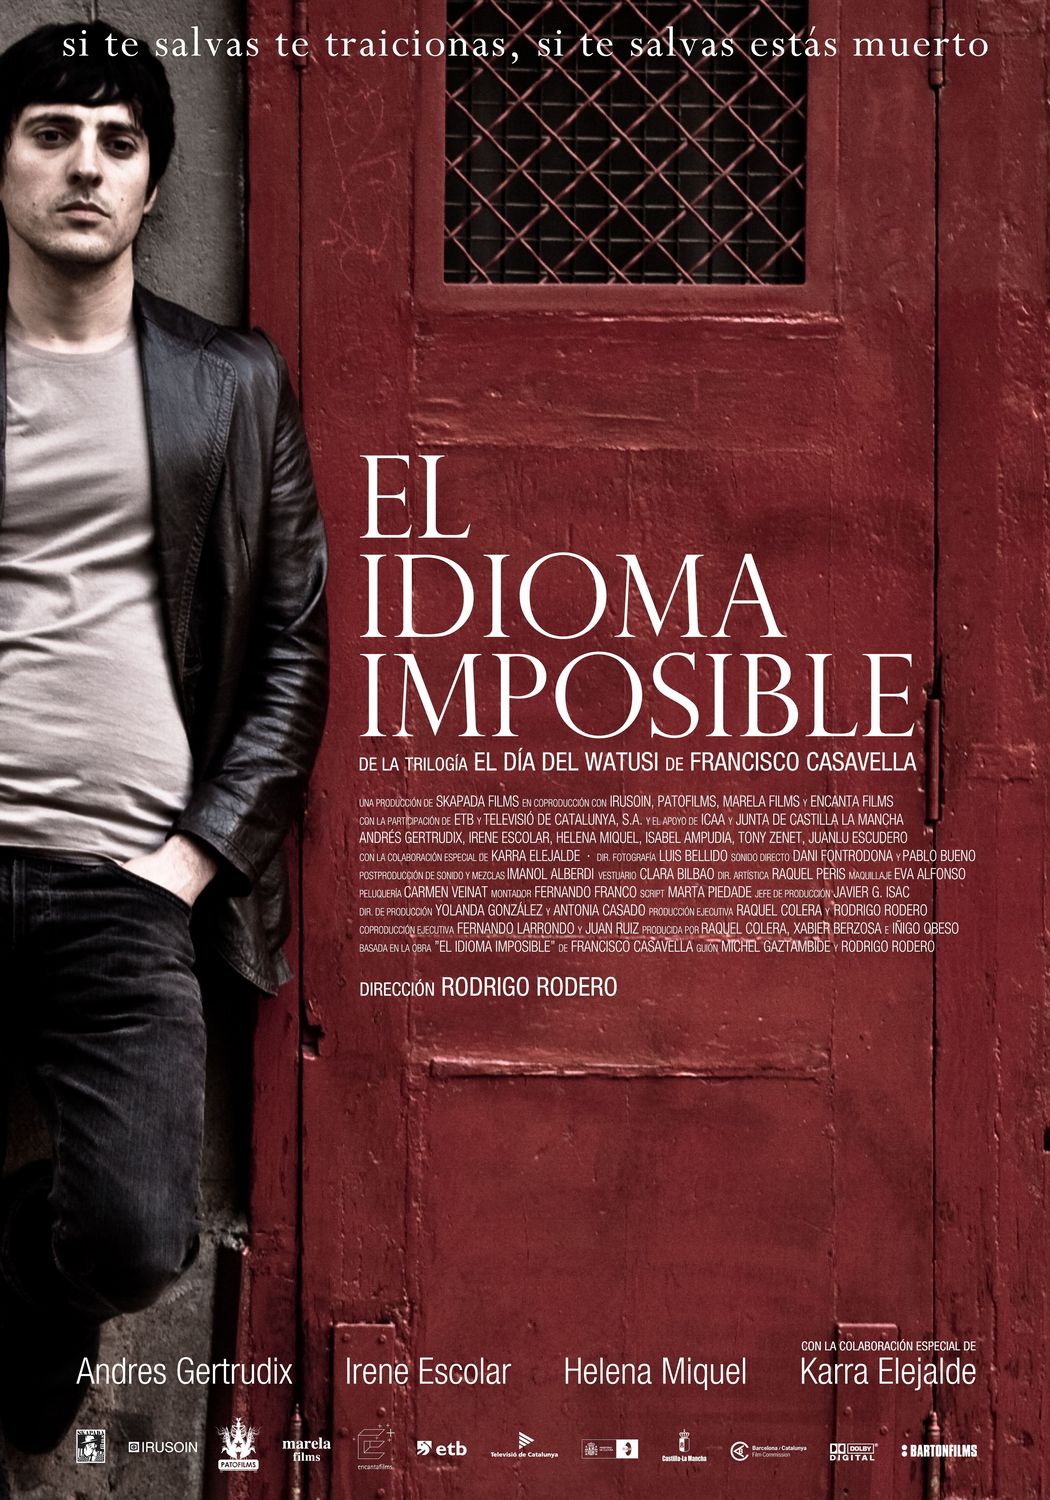 Extra Large Movie Poster Image for El idioma imposible 